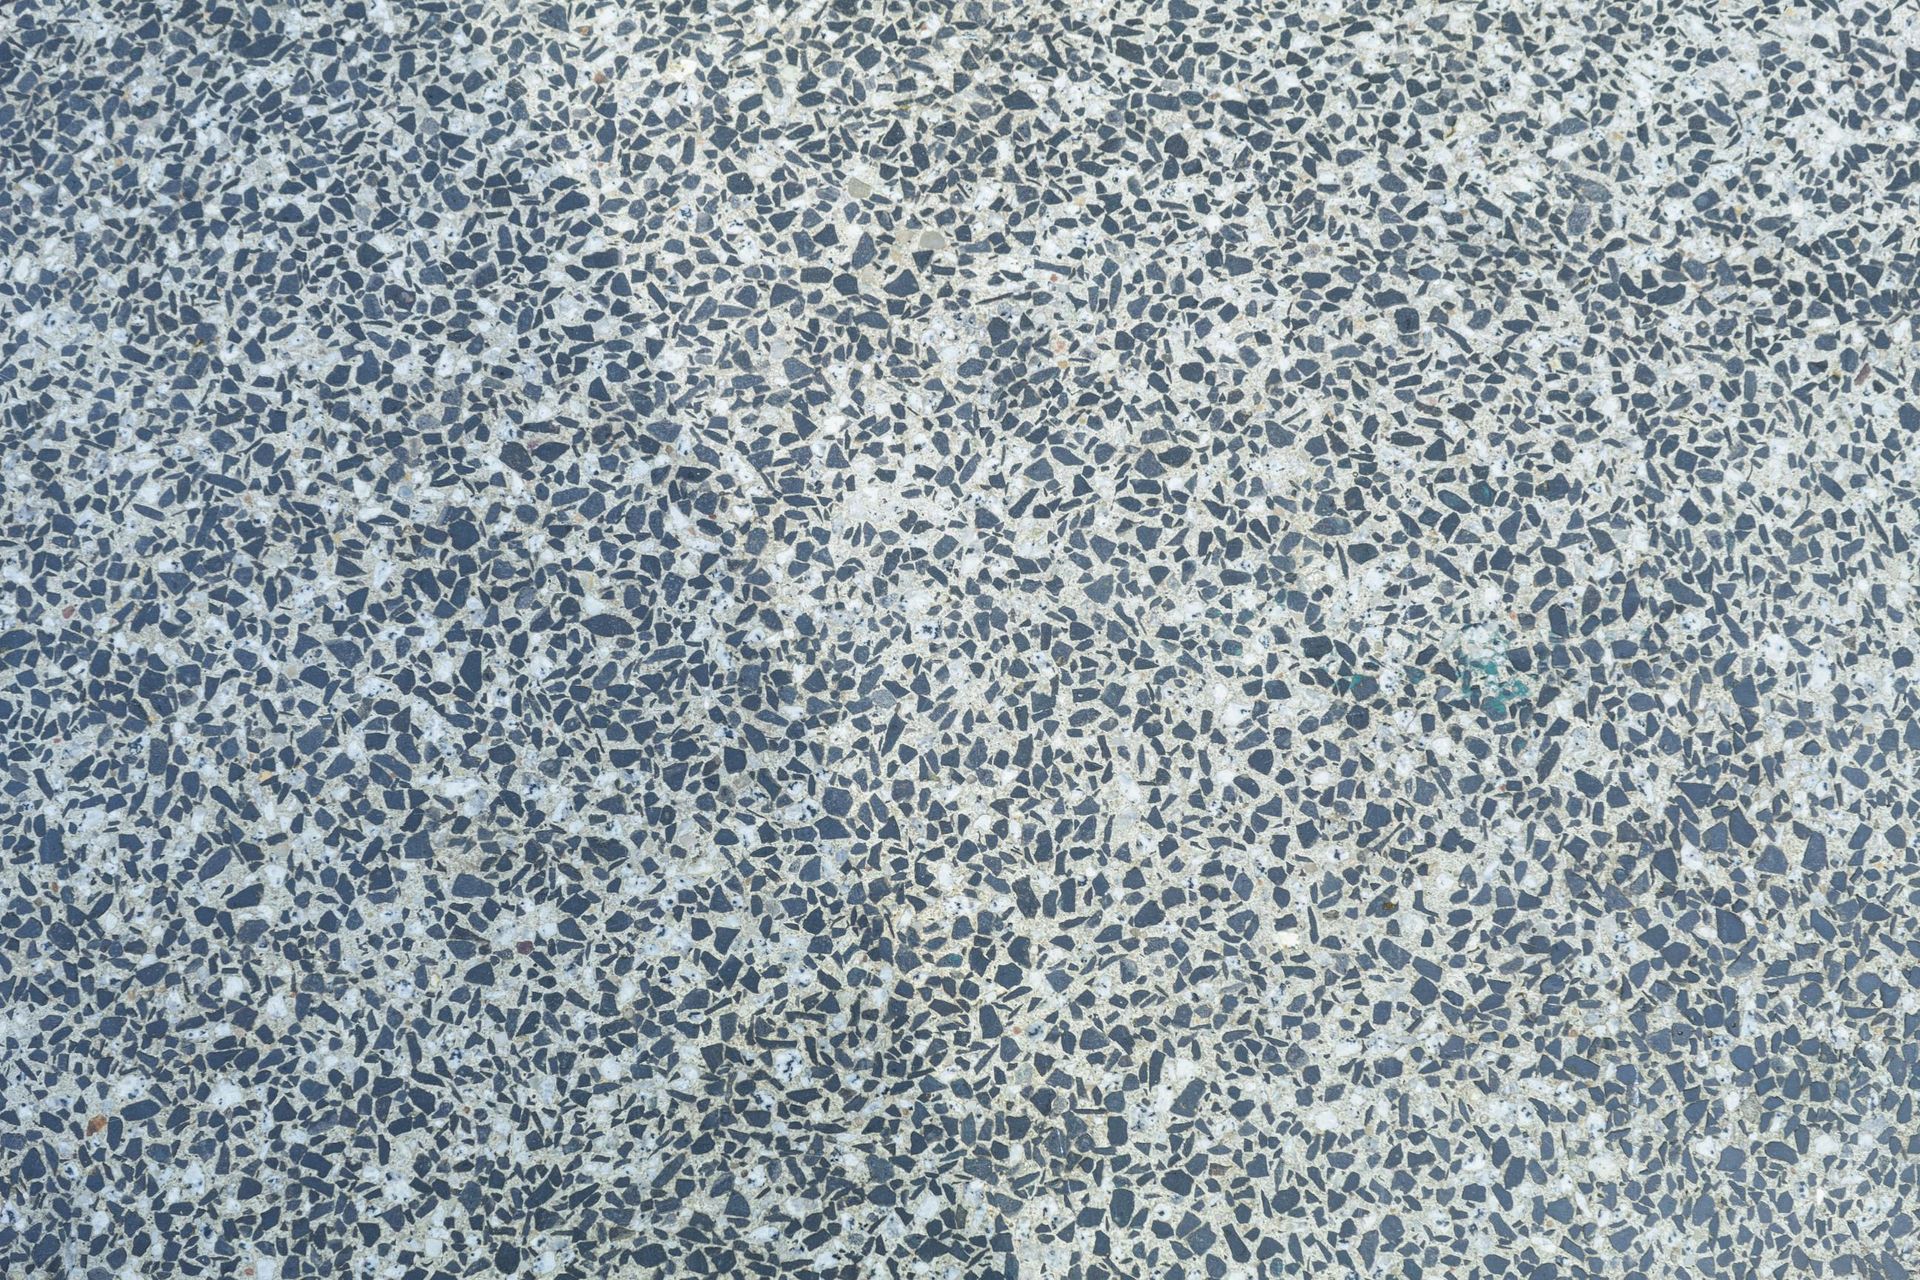 A close up of a gray and white marble texture.